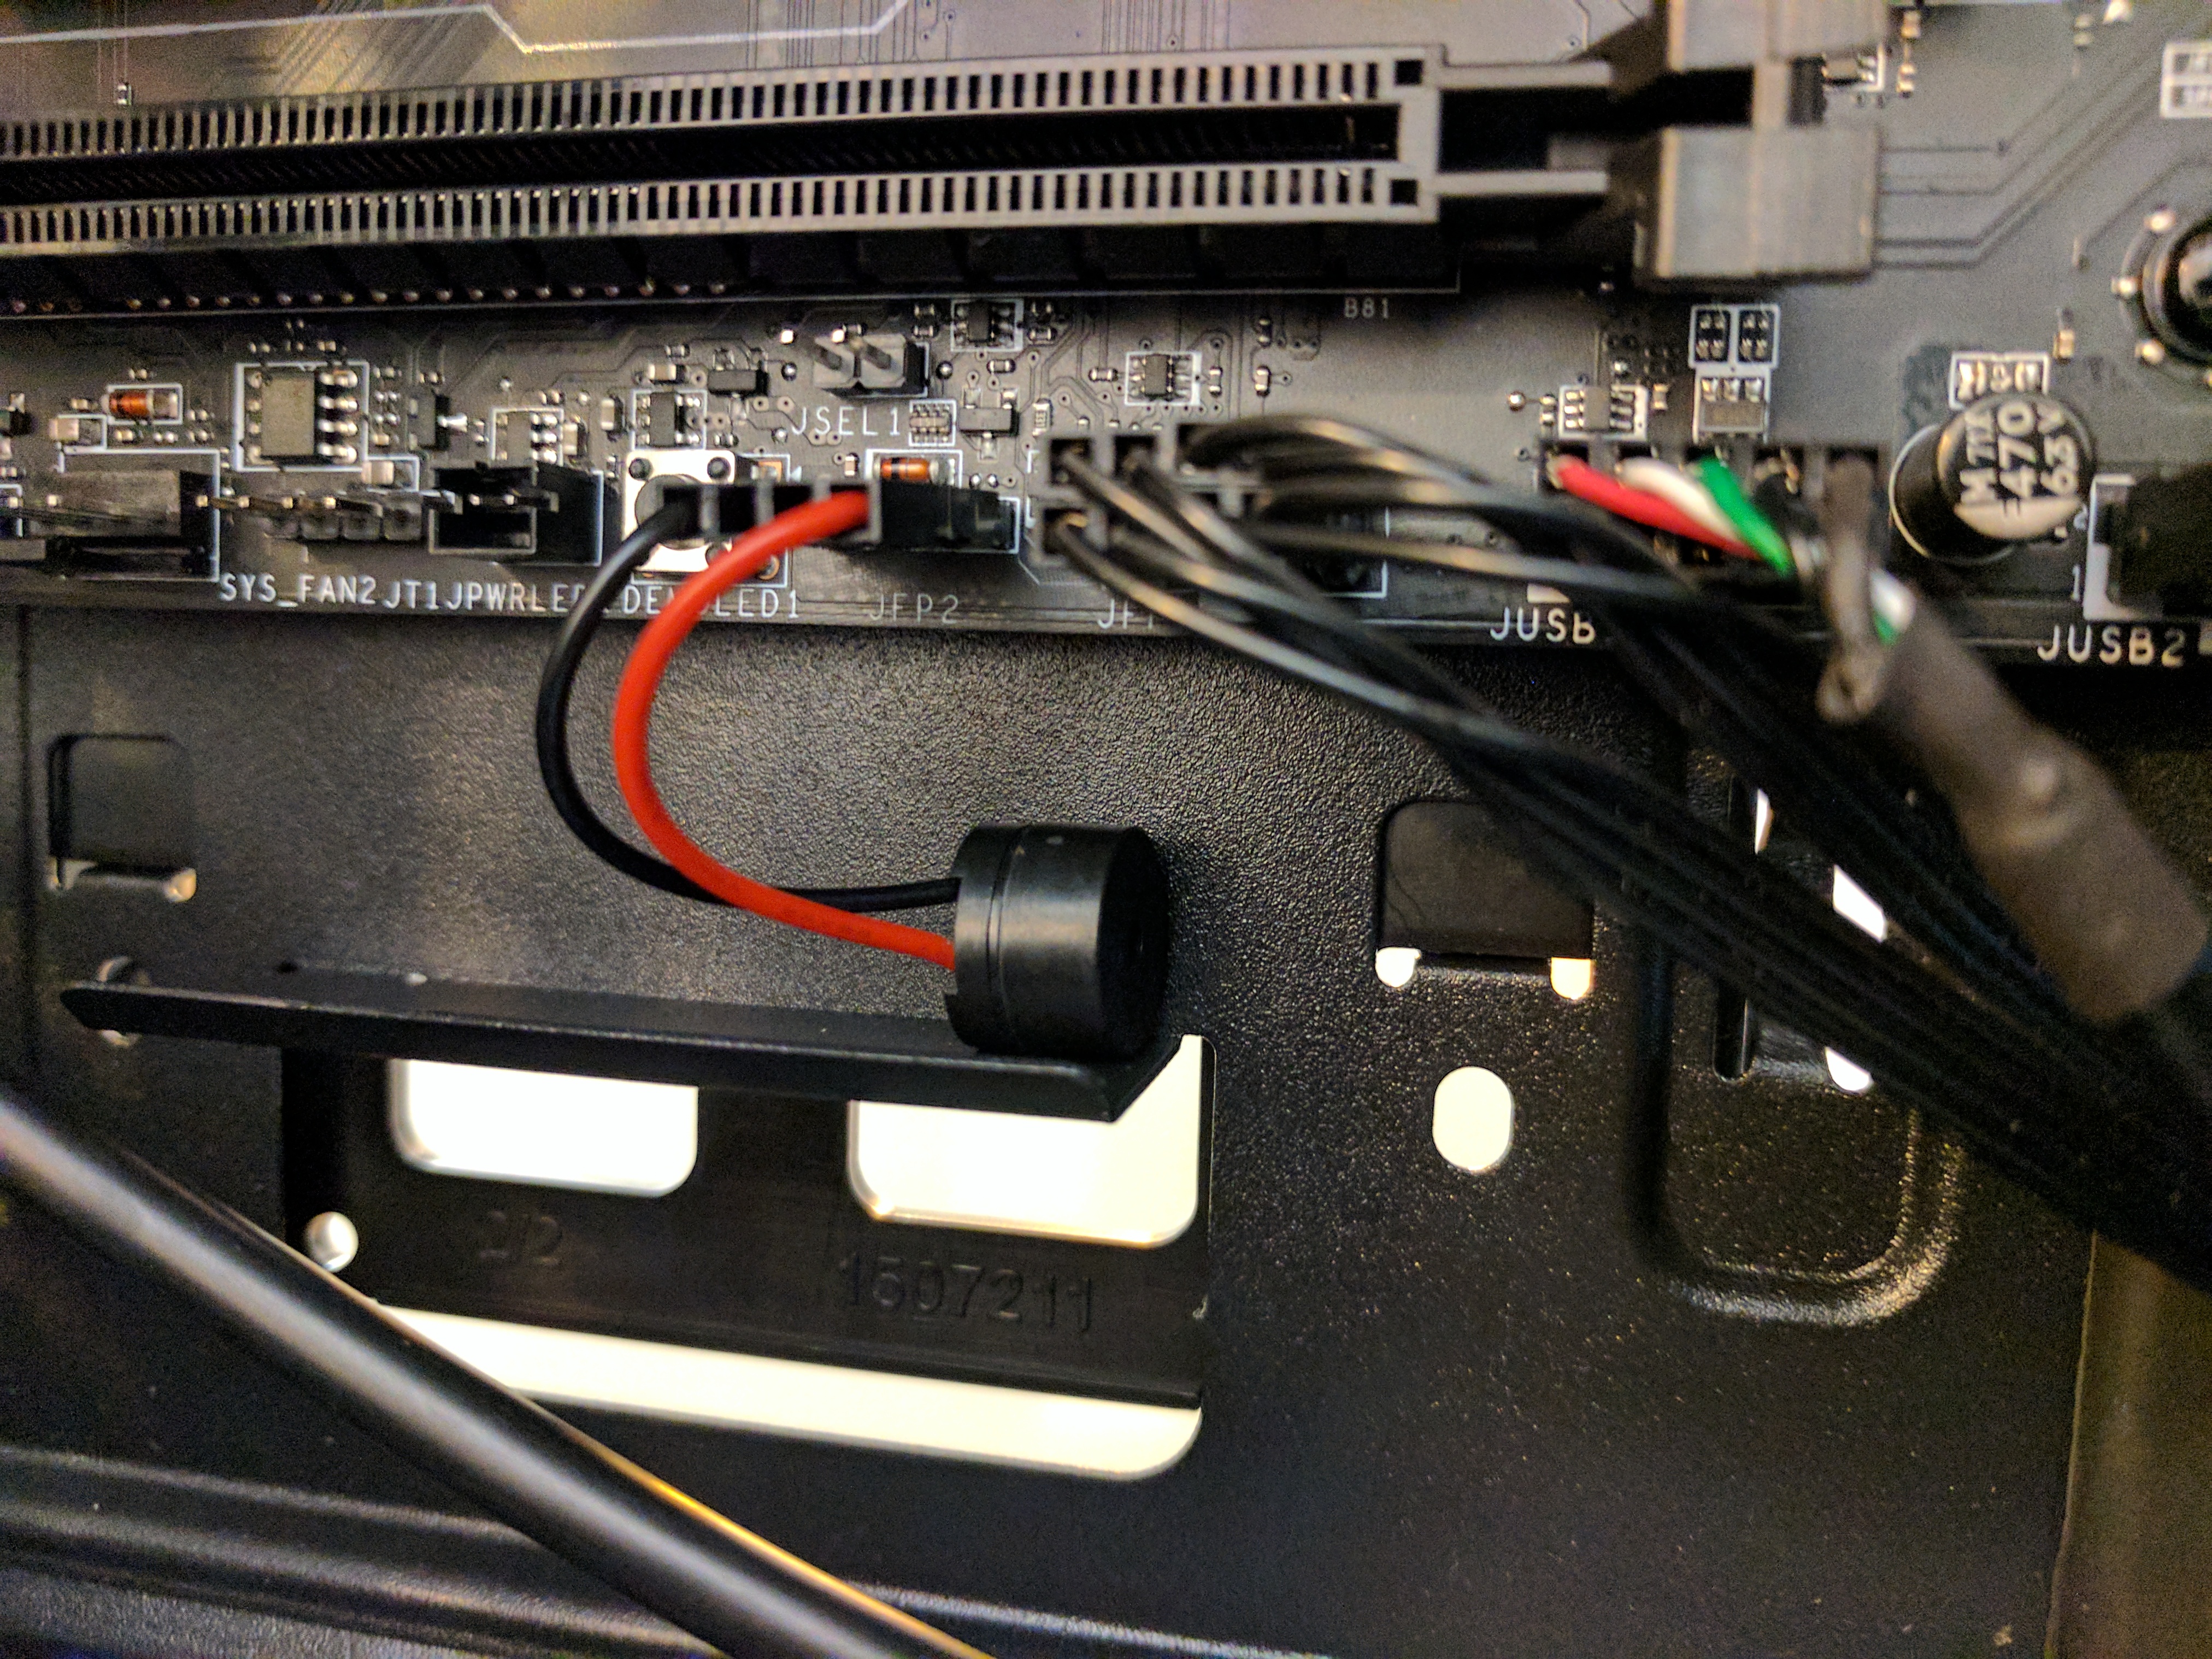 Attaching up the case header pins, some fan plugs, and of course… the speaker!